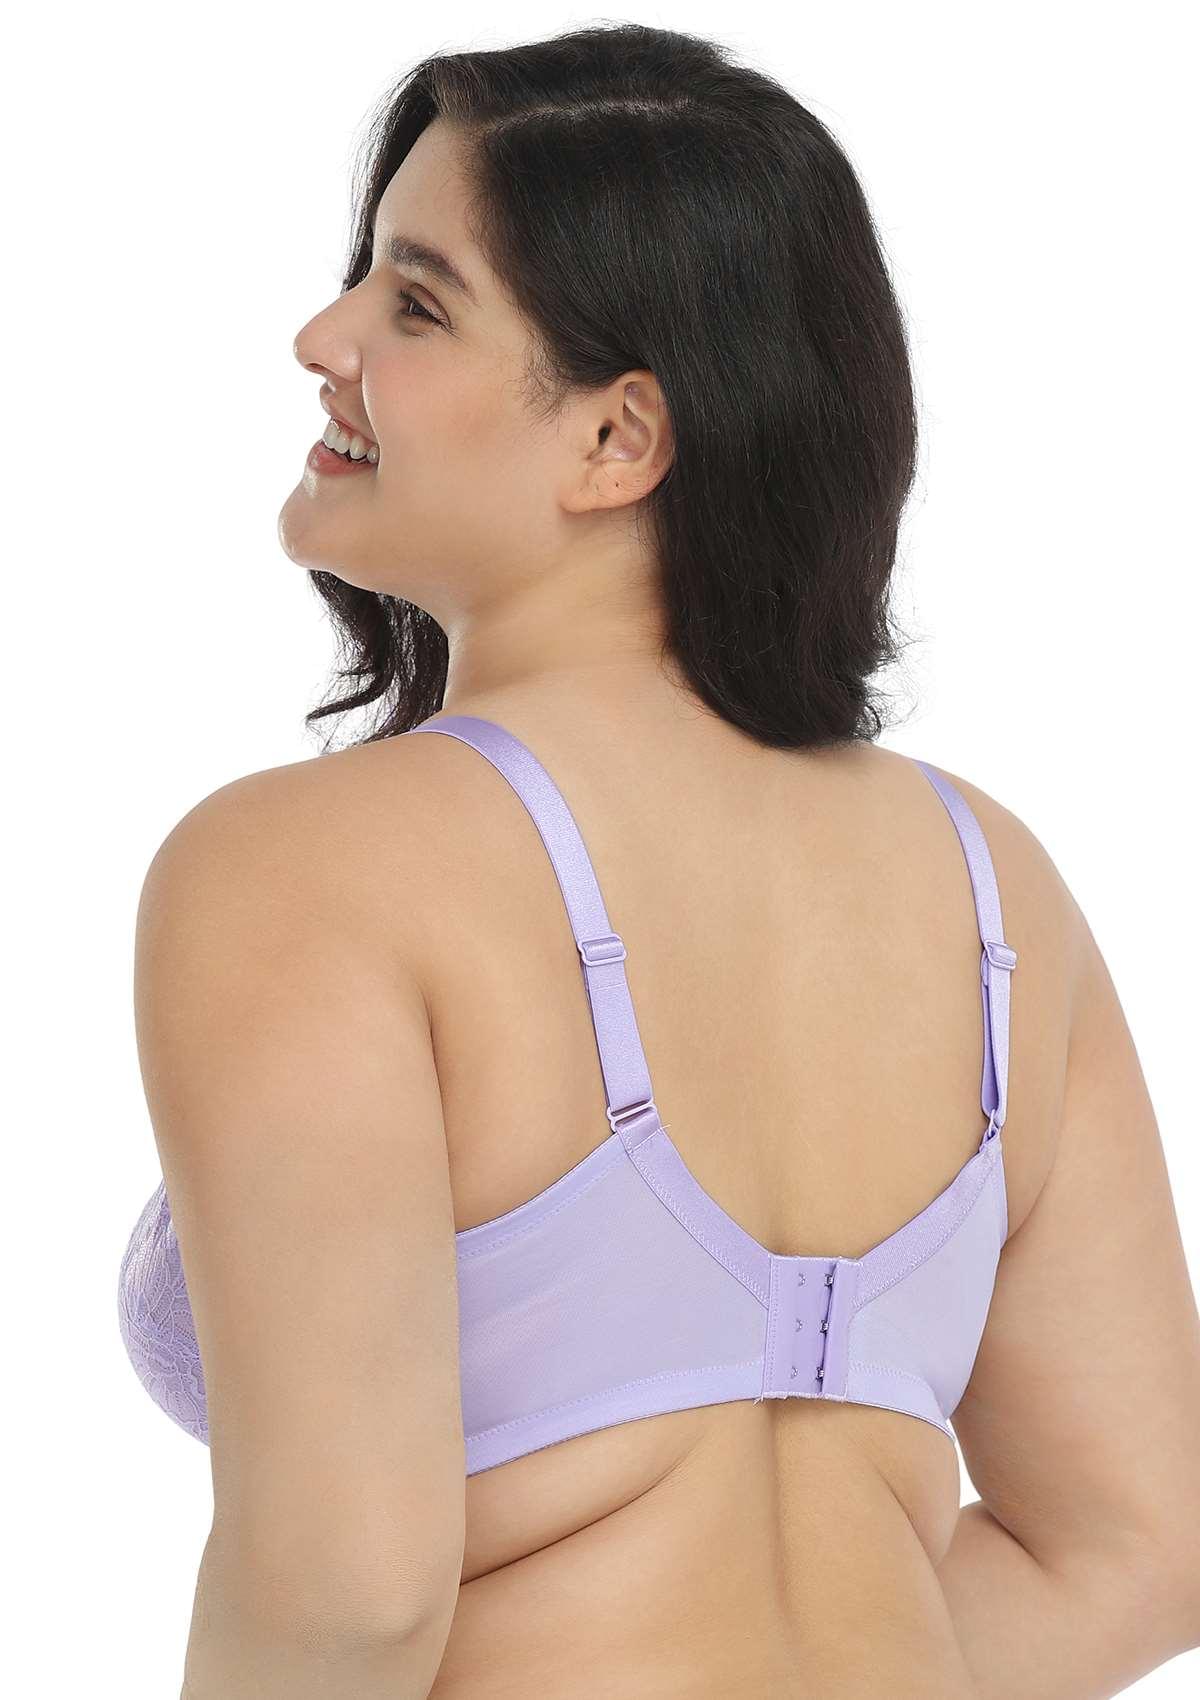 HSIA Blossom Transparent Lace Bra: Plus Size Wired Back Smoothing Bra - Light Purple / 40 / G